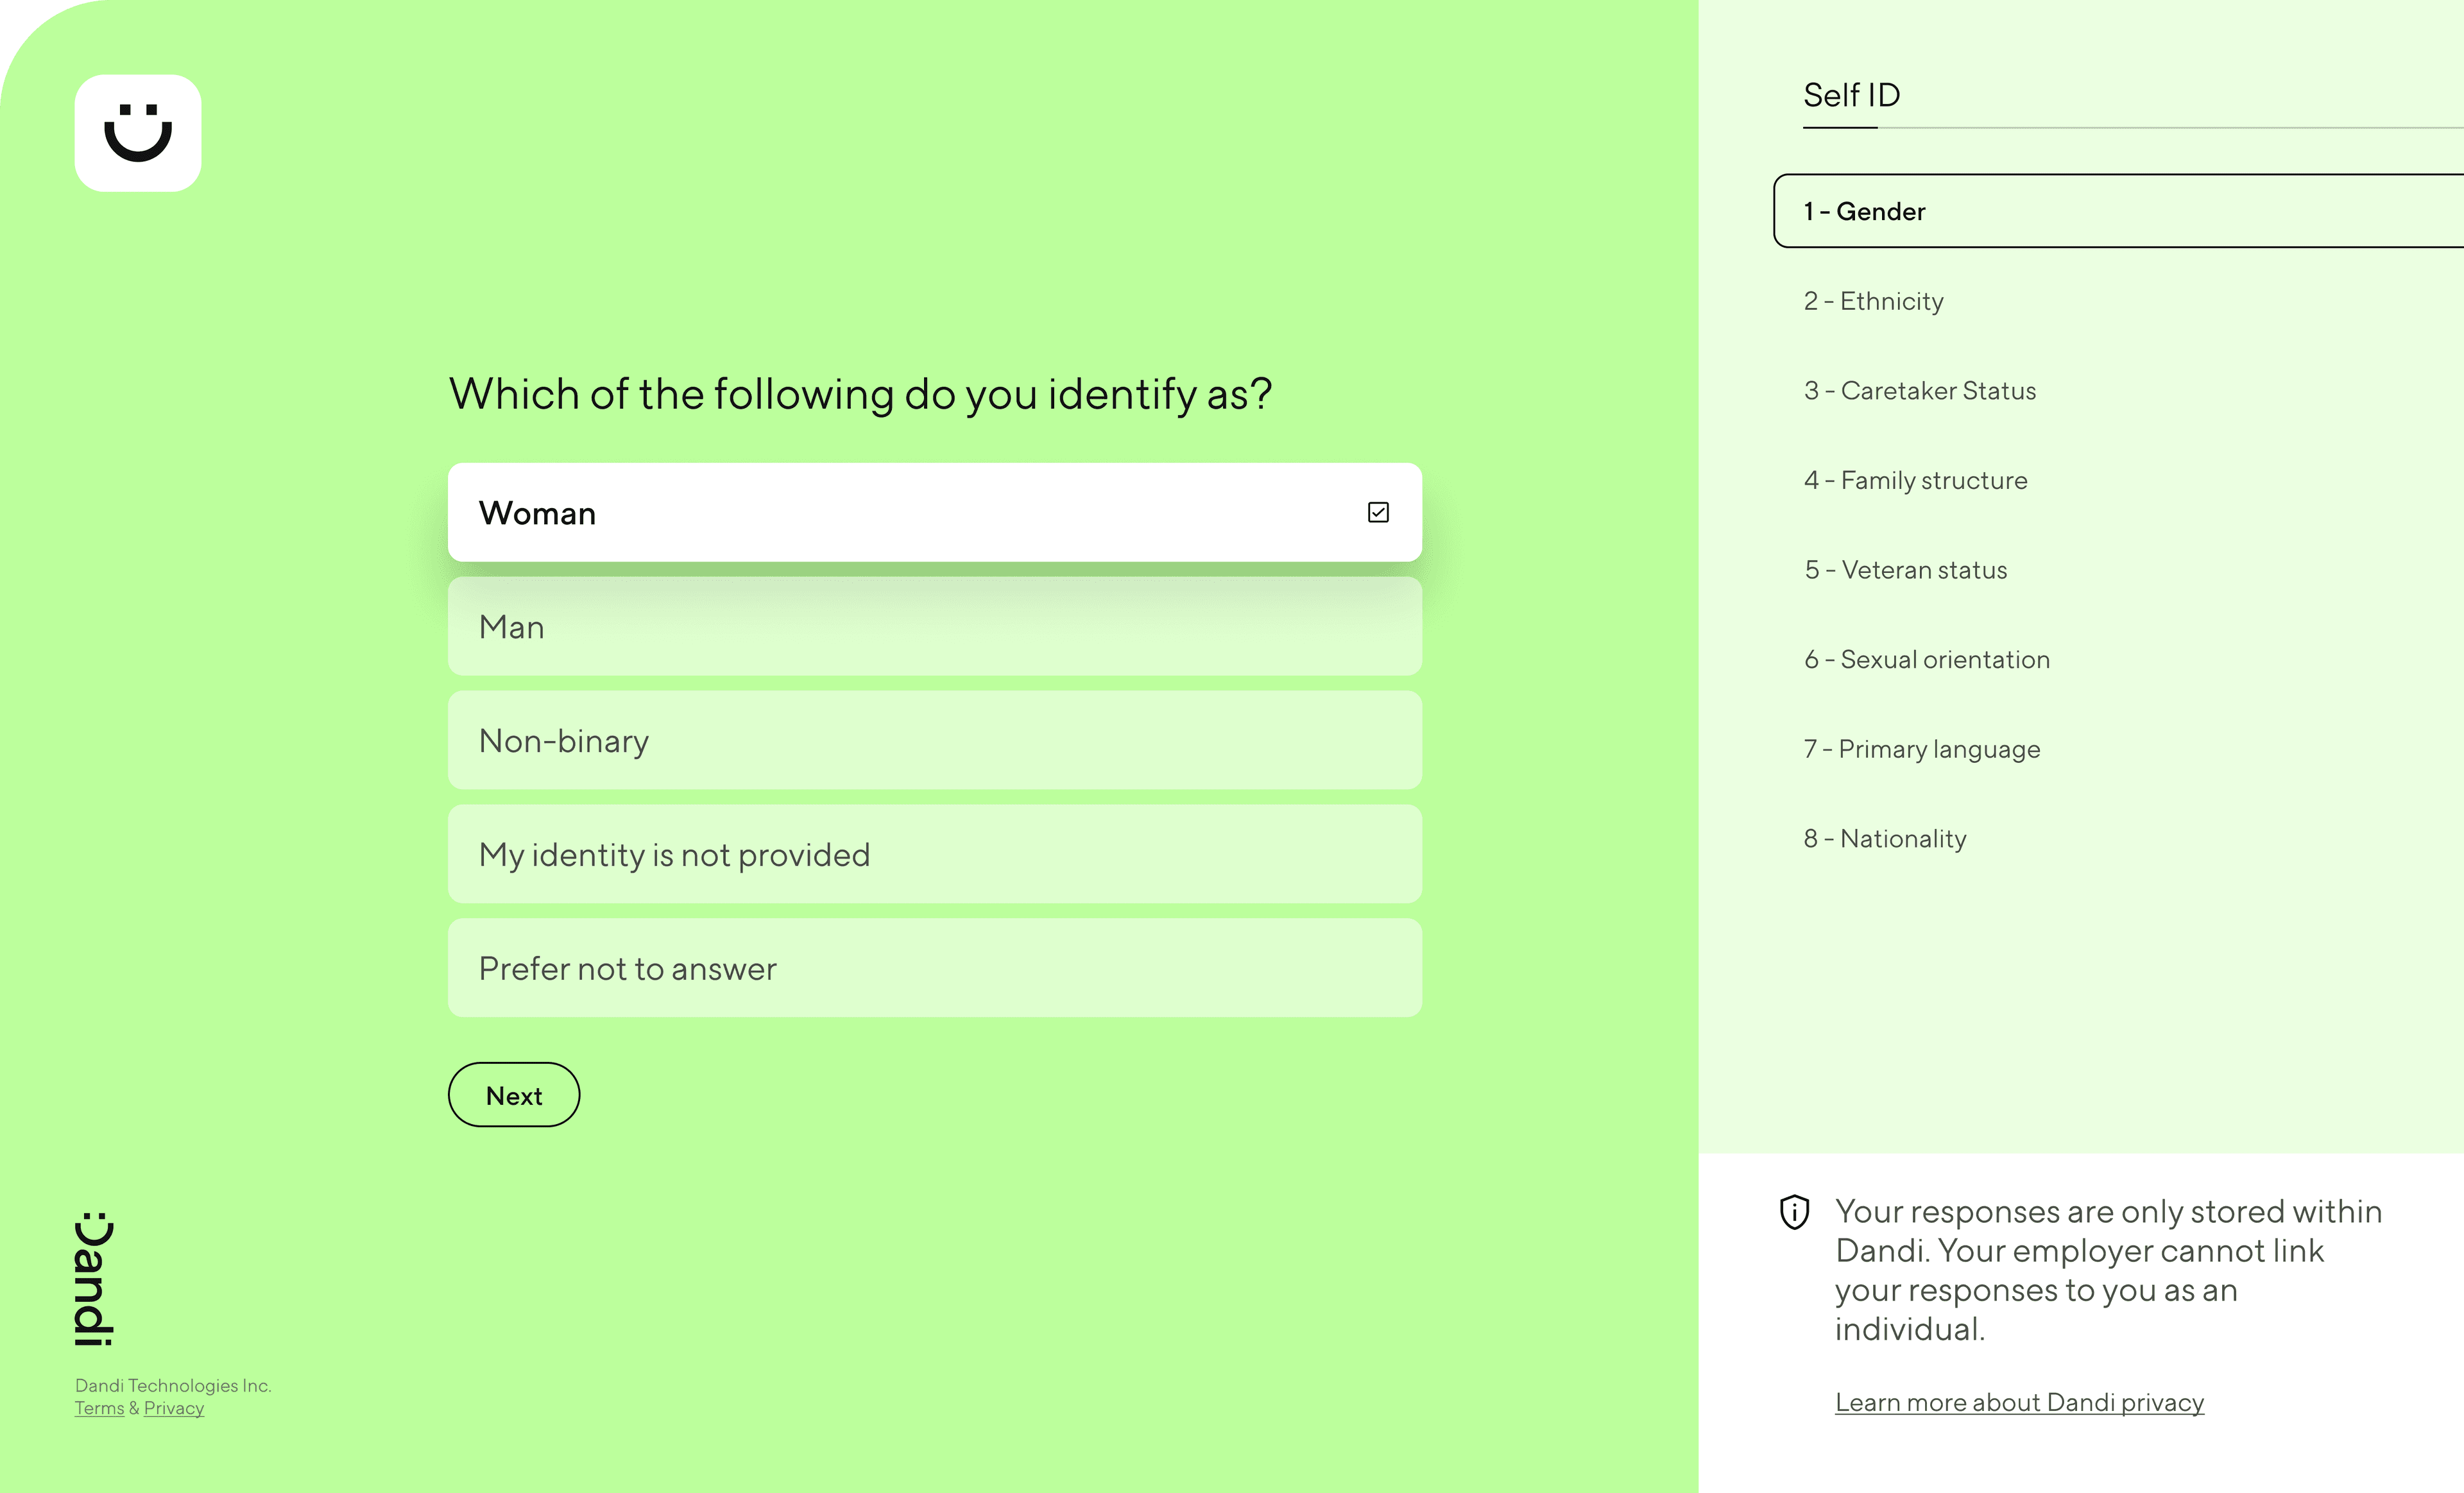 Dandi's Self-ID questionnaire prompting, Which of the following do you identify as? and offering the following options: Woman, Man, Non-binary, My identity is not provided, and Prefer not to answer. A menu on the right shows additional self-ID categories. The bottom right includes privacy information.